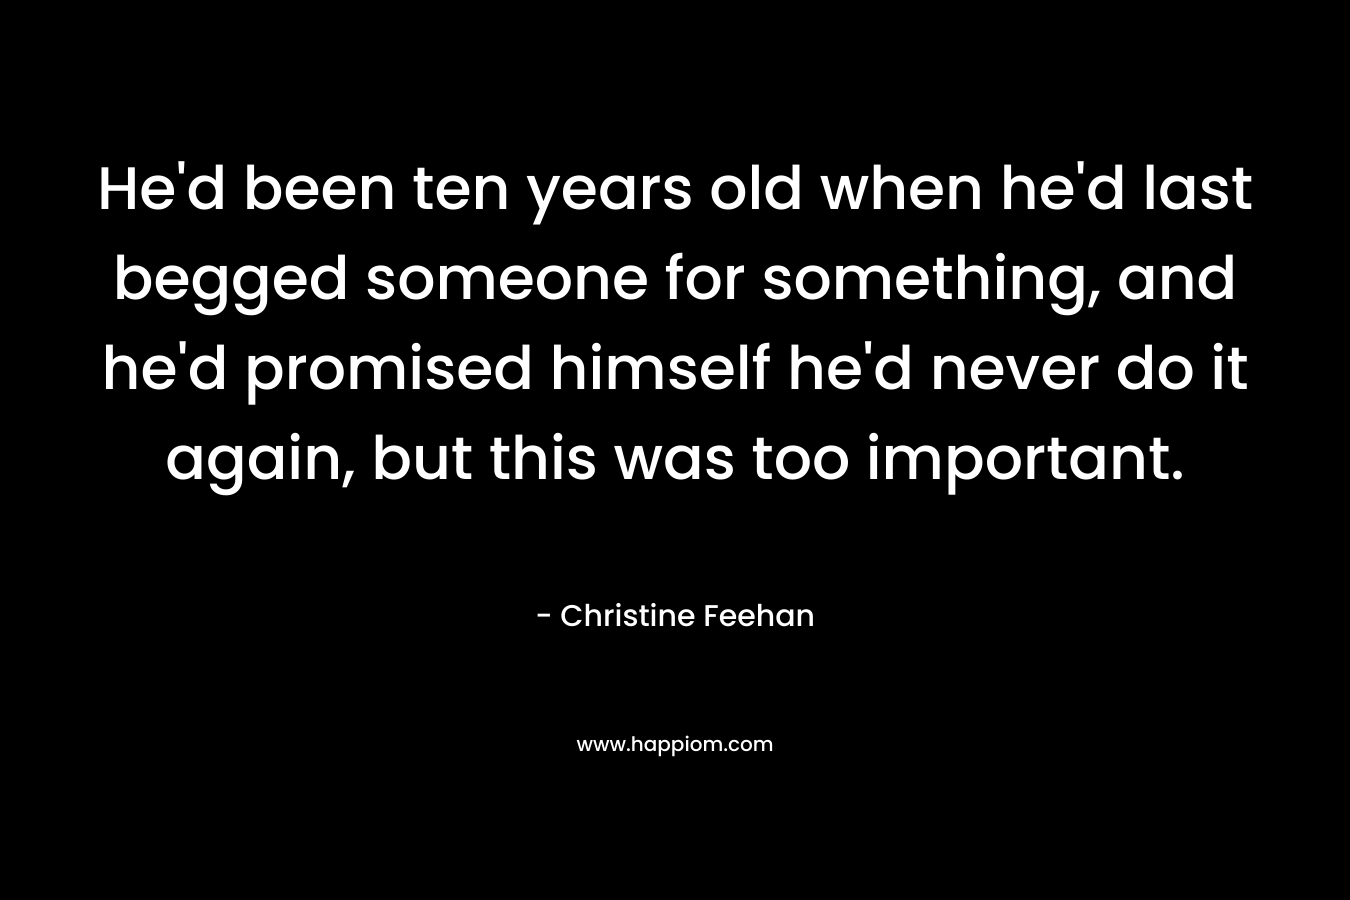 He’d been ten years old when he’d last begged someone for something, and he’d promised himself he’d never do it again, but this was too important. – Christine Feehan